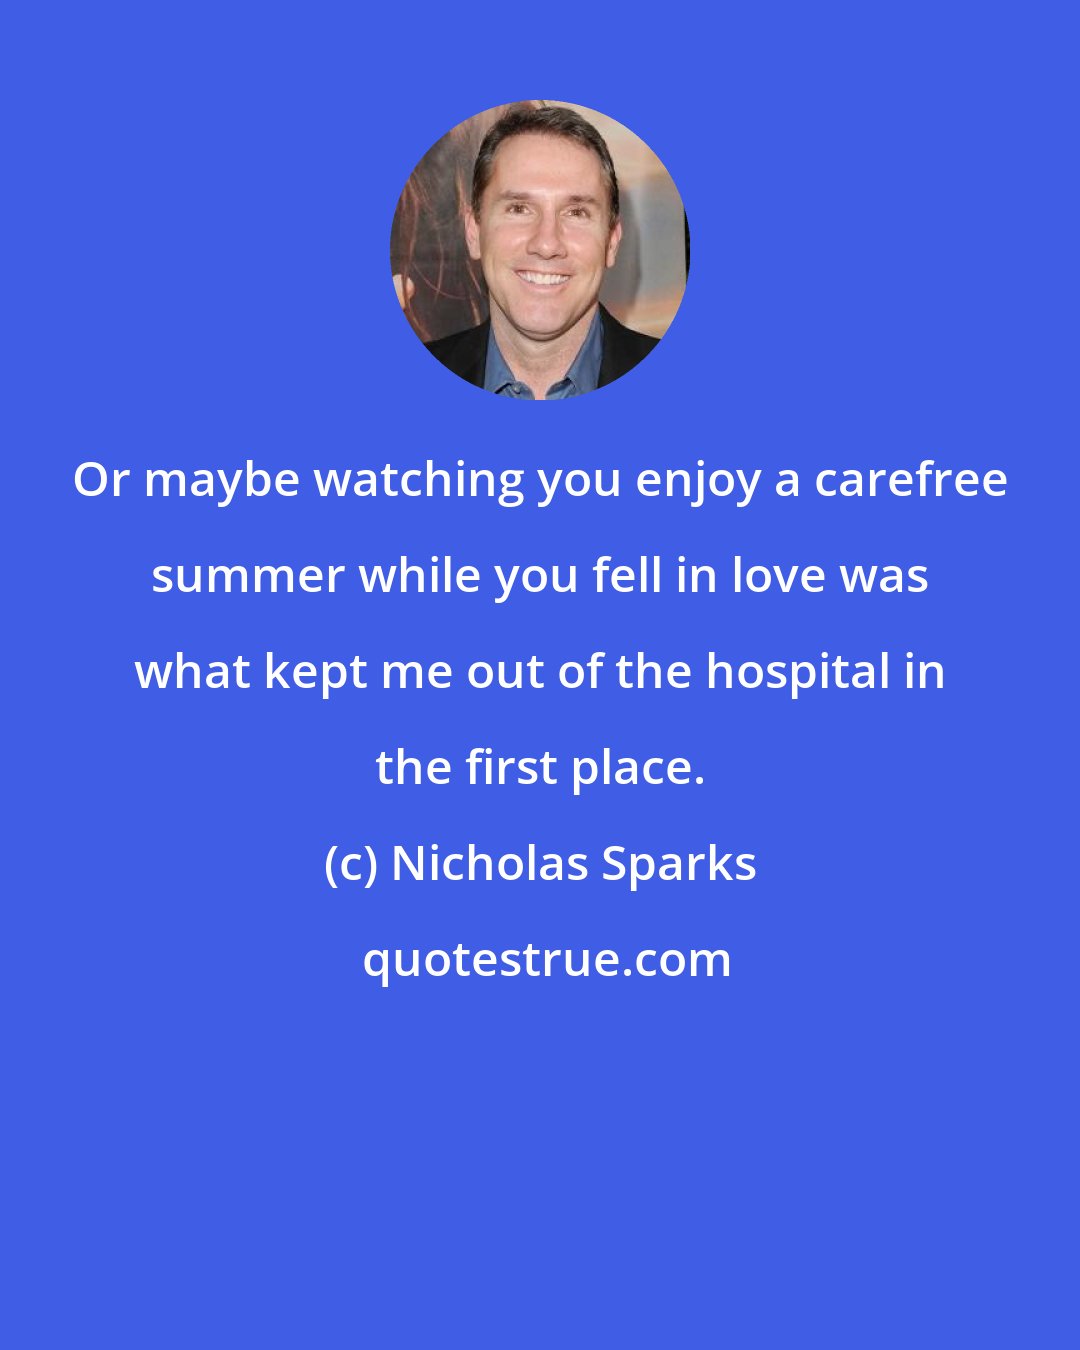 Nicholas Sparks: Or maybe watching you enjoy a carefree summer while you fell in love was what kept me out of the hospital in the first place.